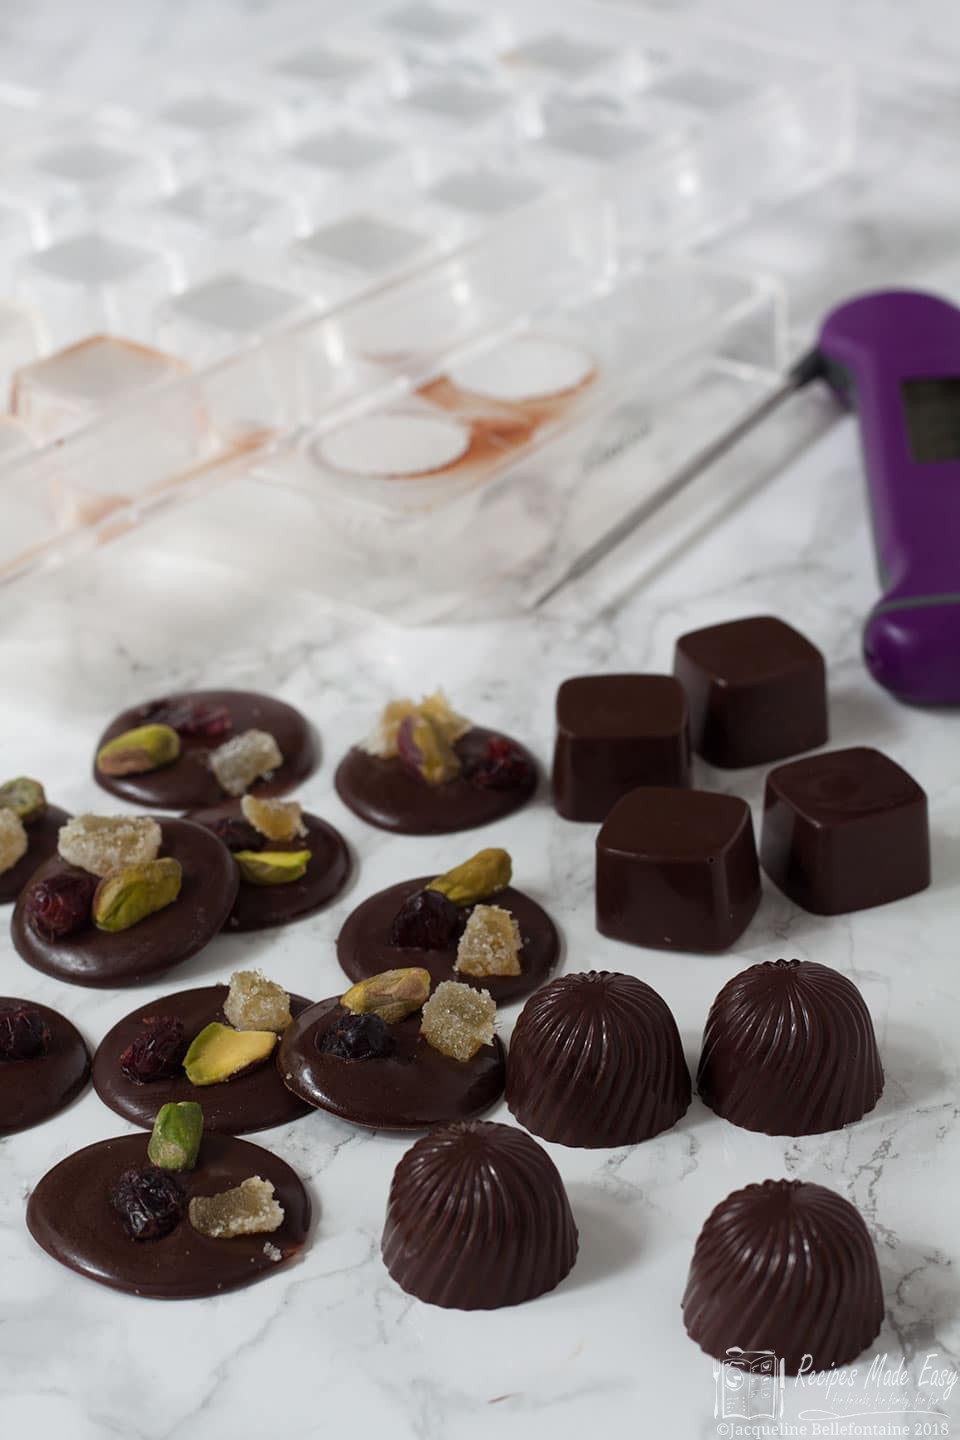 Selection of homemade chocolates by recipes made easy with chocolate moulds and thermometer on the side